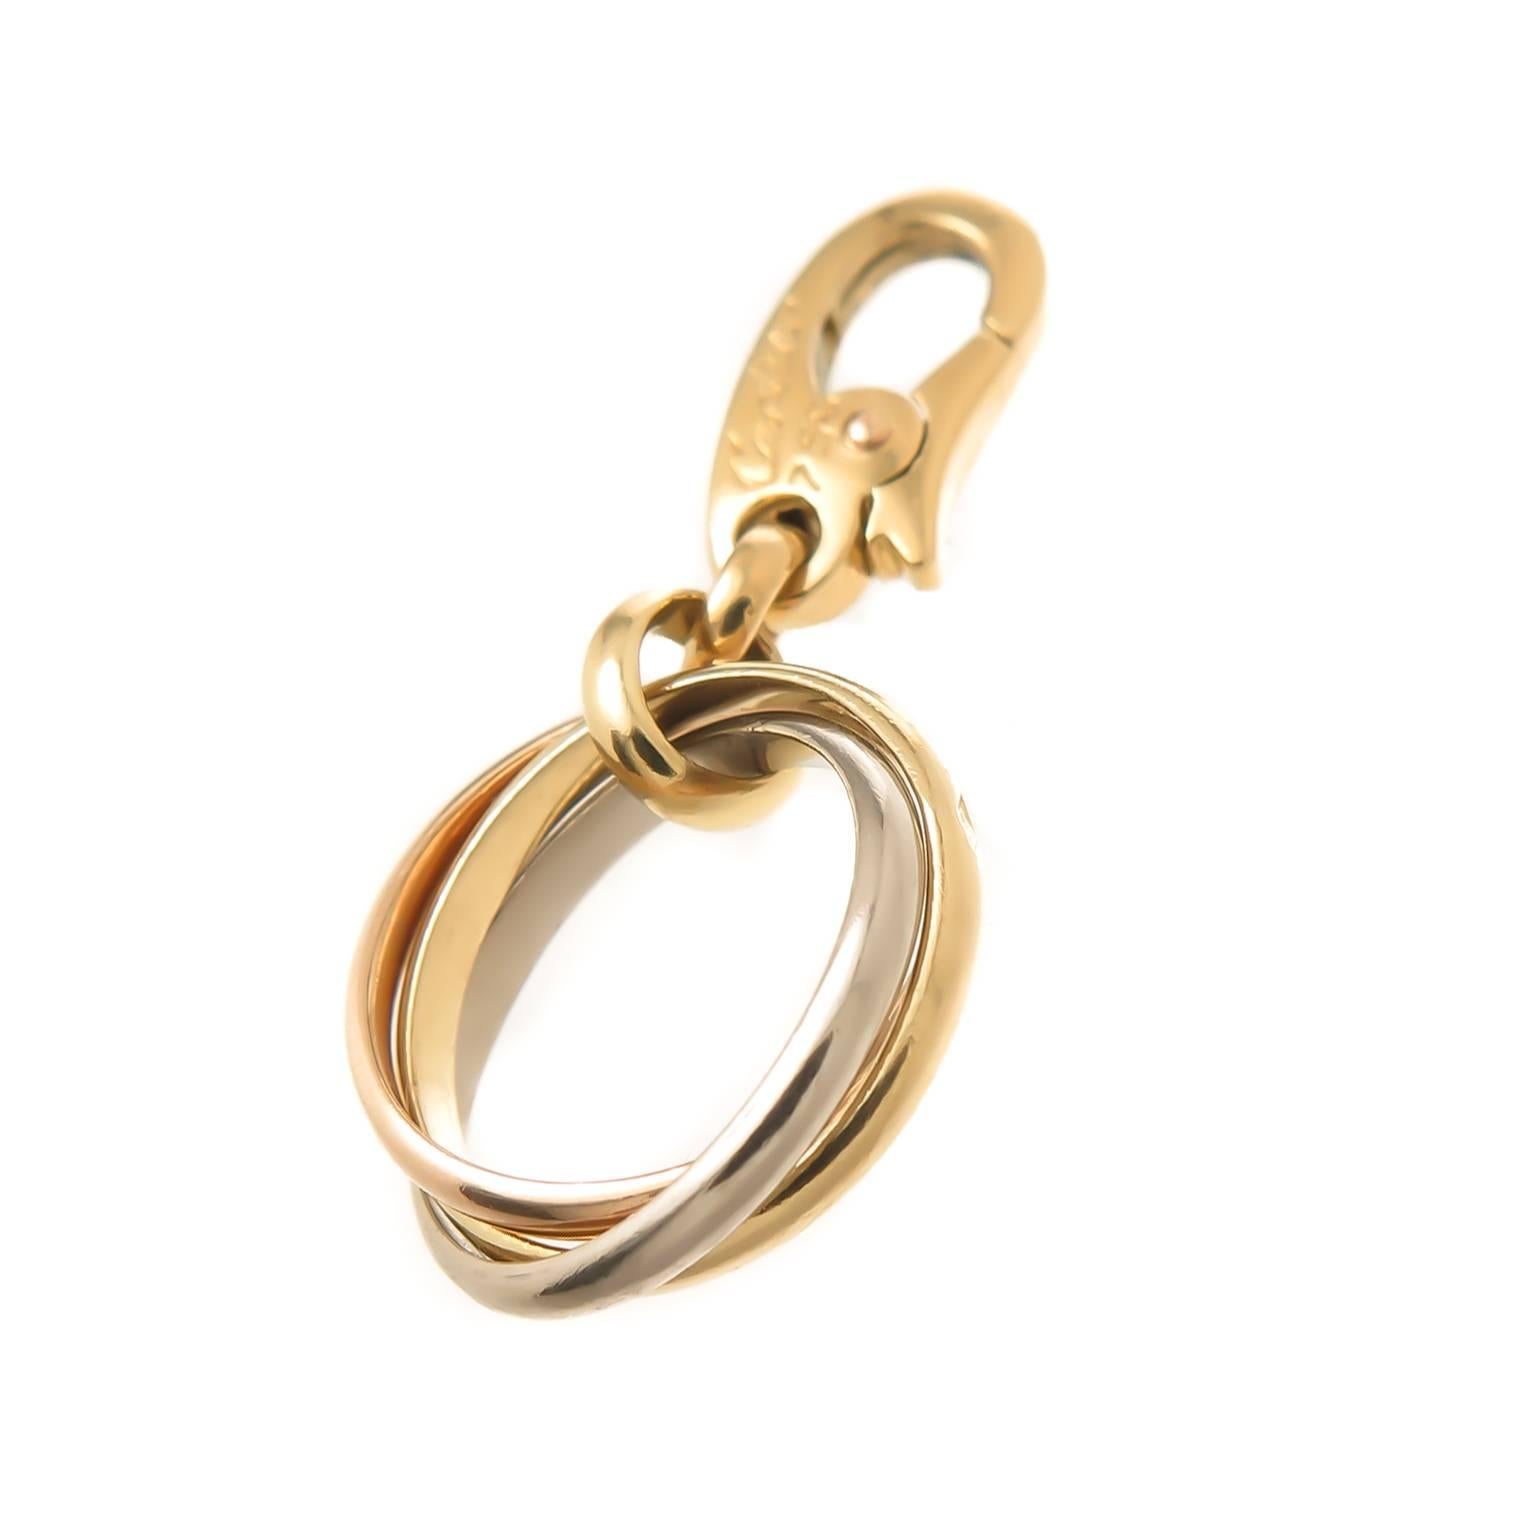 Circa 2000 Cartier 18K Yellow, Pink and White Gold Trinity Ring Charm. Measuring 1/2 inch in diameter, can be easily attached to a charm bracelet or worn as a pendant. Signed, Numbered and having French Hall Marks.